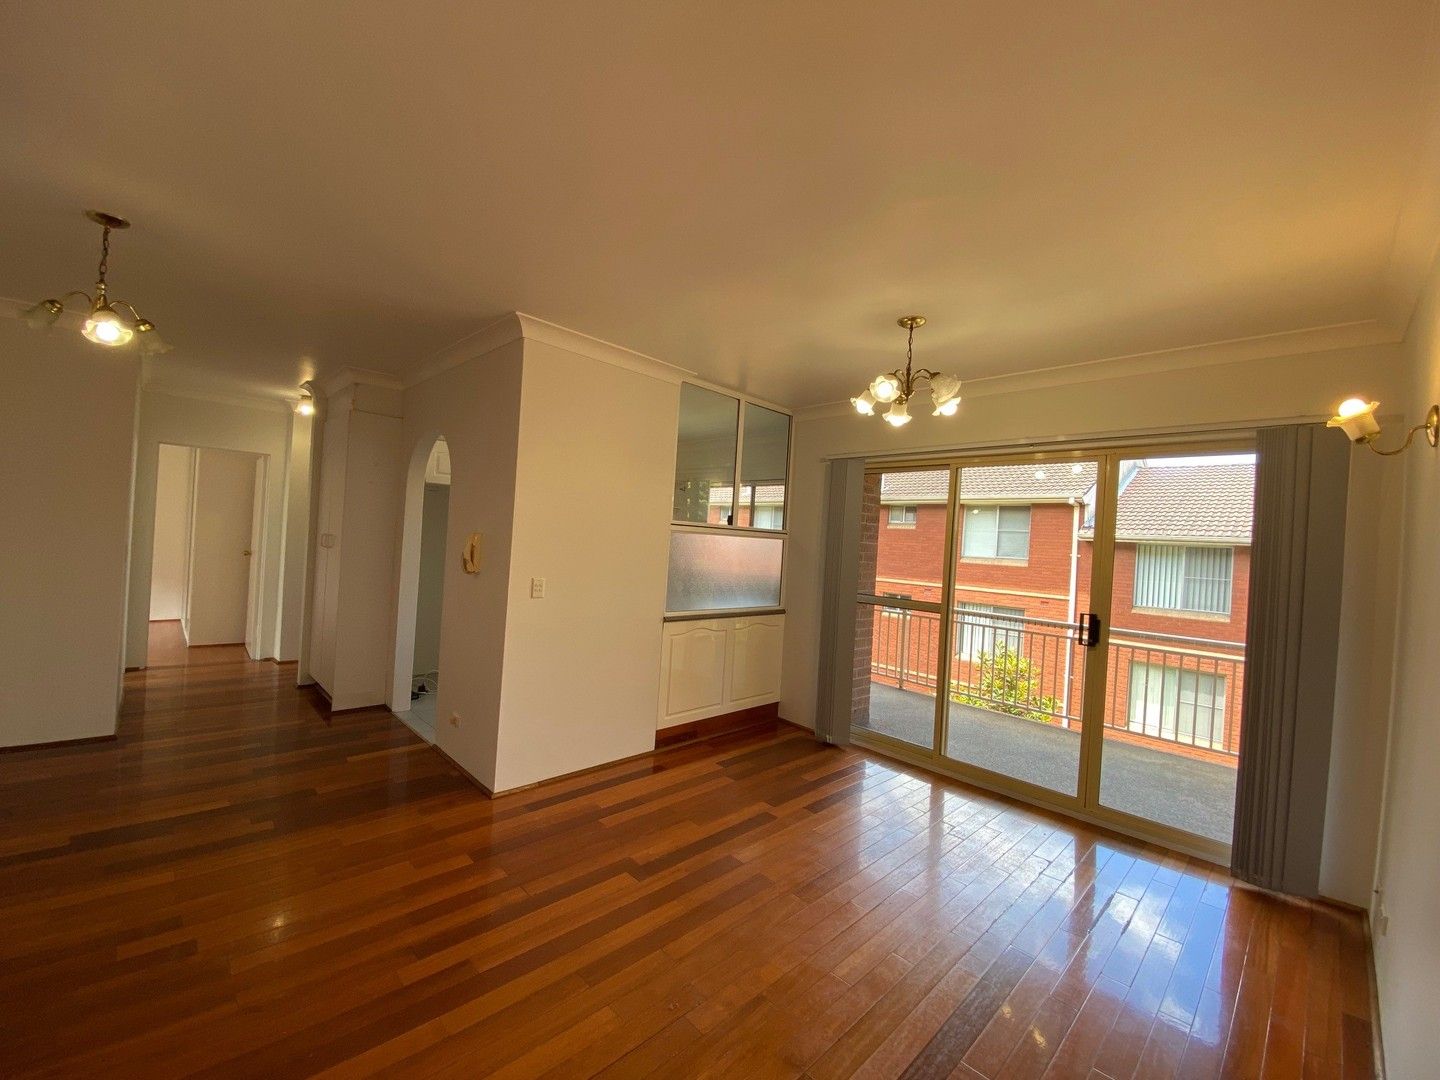 2 bedrooms Apartment / Unit / Flat in 4/26 Early Street PARRAMATTA NSW, 2150